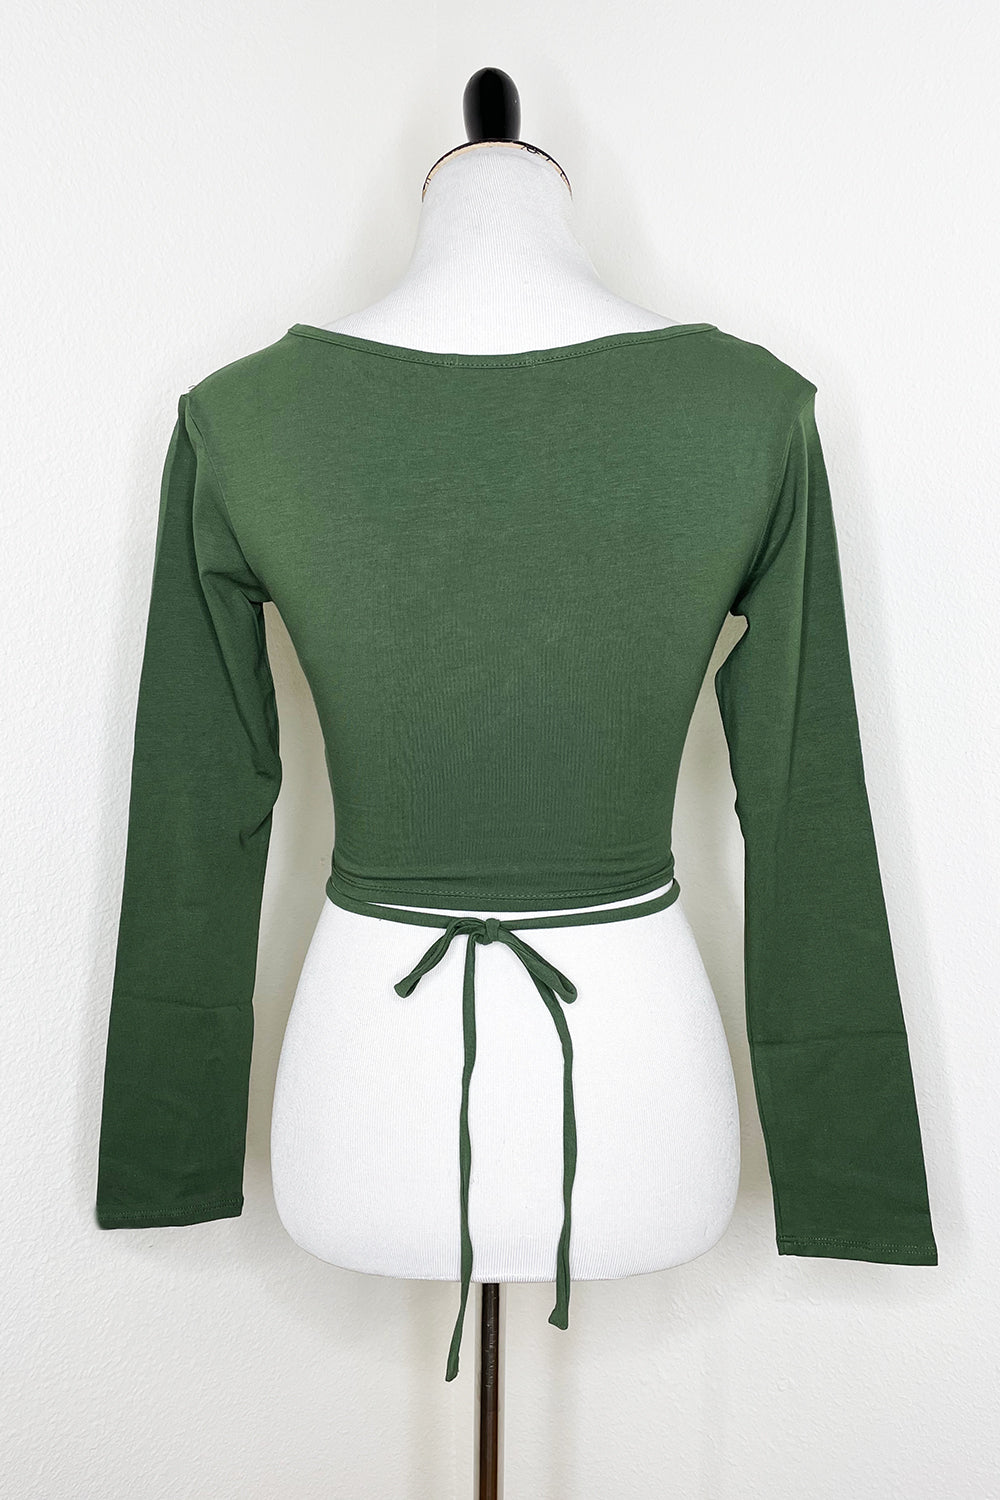 All Tied Up Crop Top Olive Green